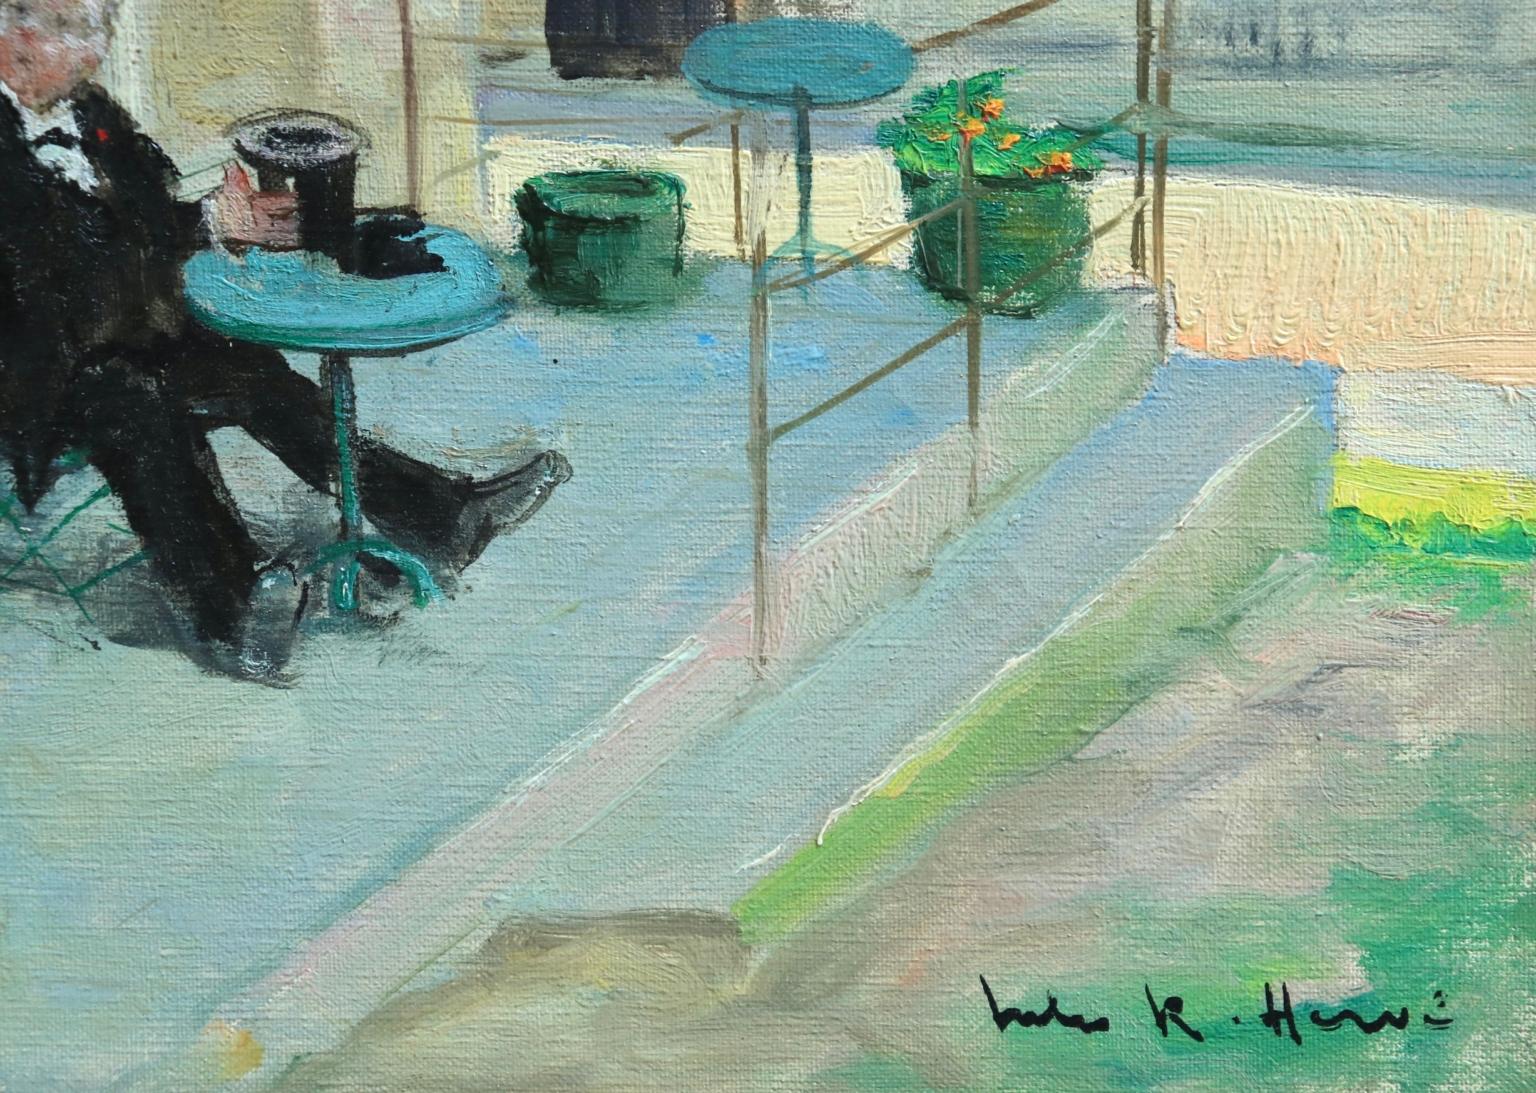 A beautiful oil on canvas circa 1930 by French impressionist painter Jules Rene Herve depicting a gentleman sitting outside of a Parisian cafe being served by a waitress. Signed lower right. 

Dimensions:
Unframed: 15